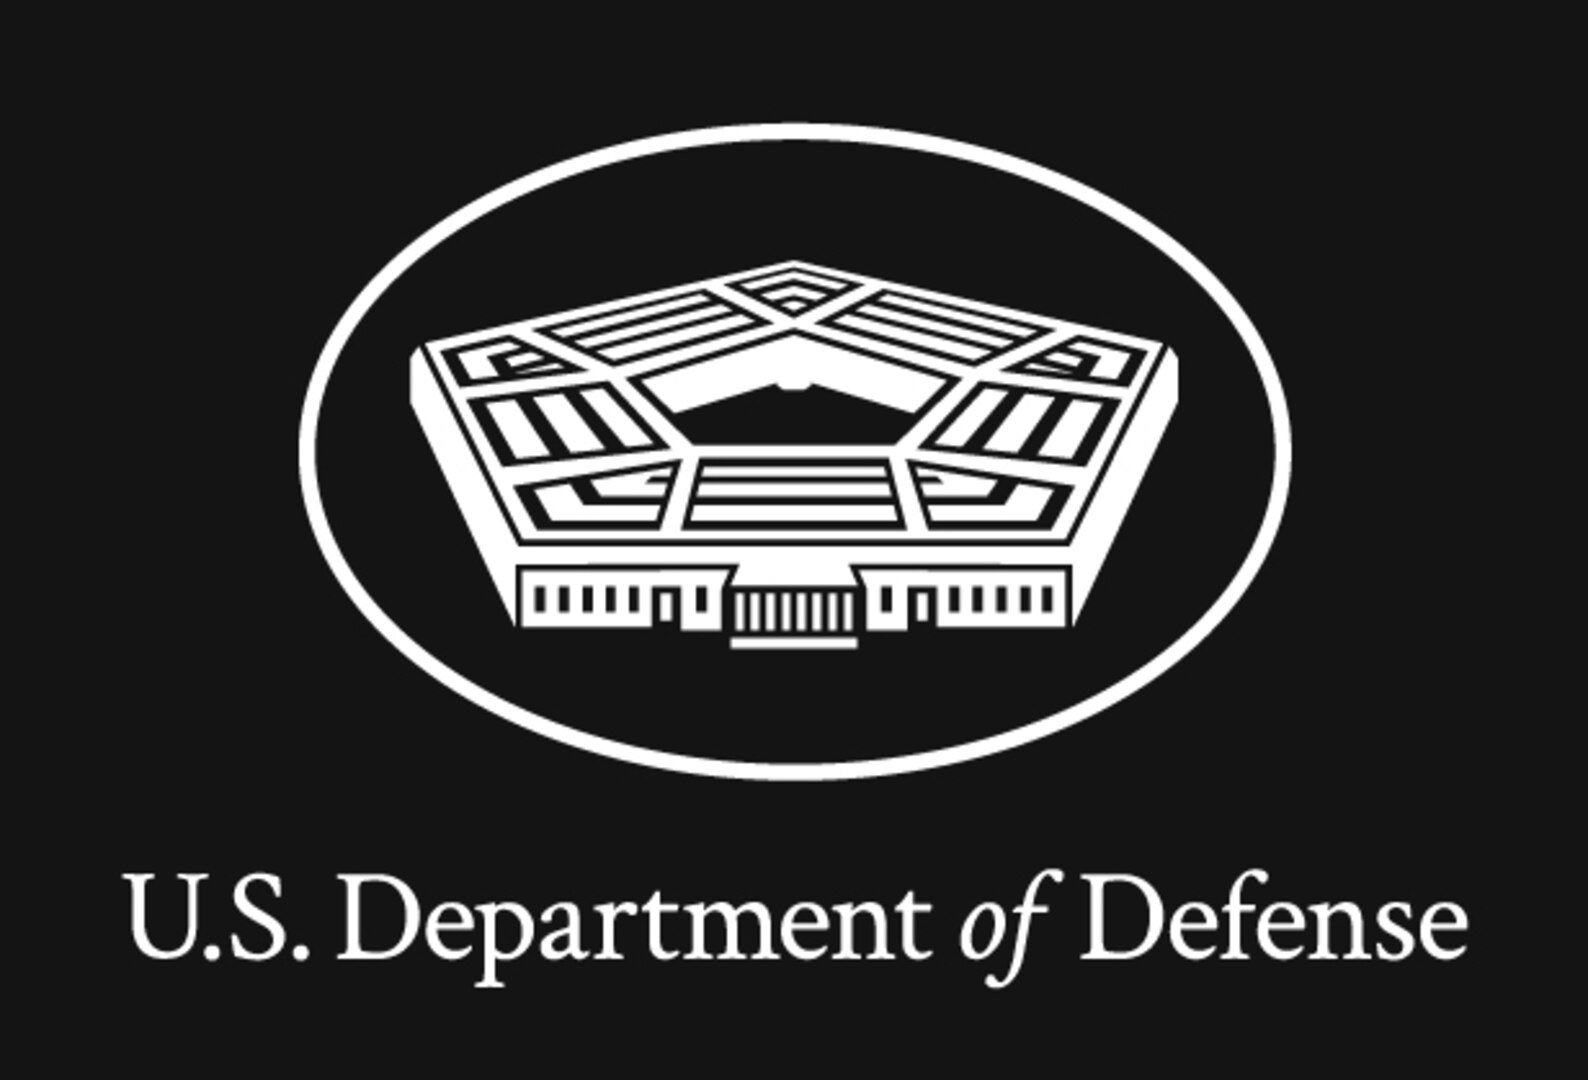 Department of Defense Courtesy Graphic